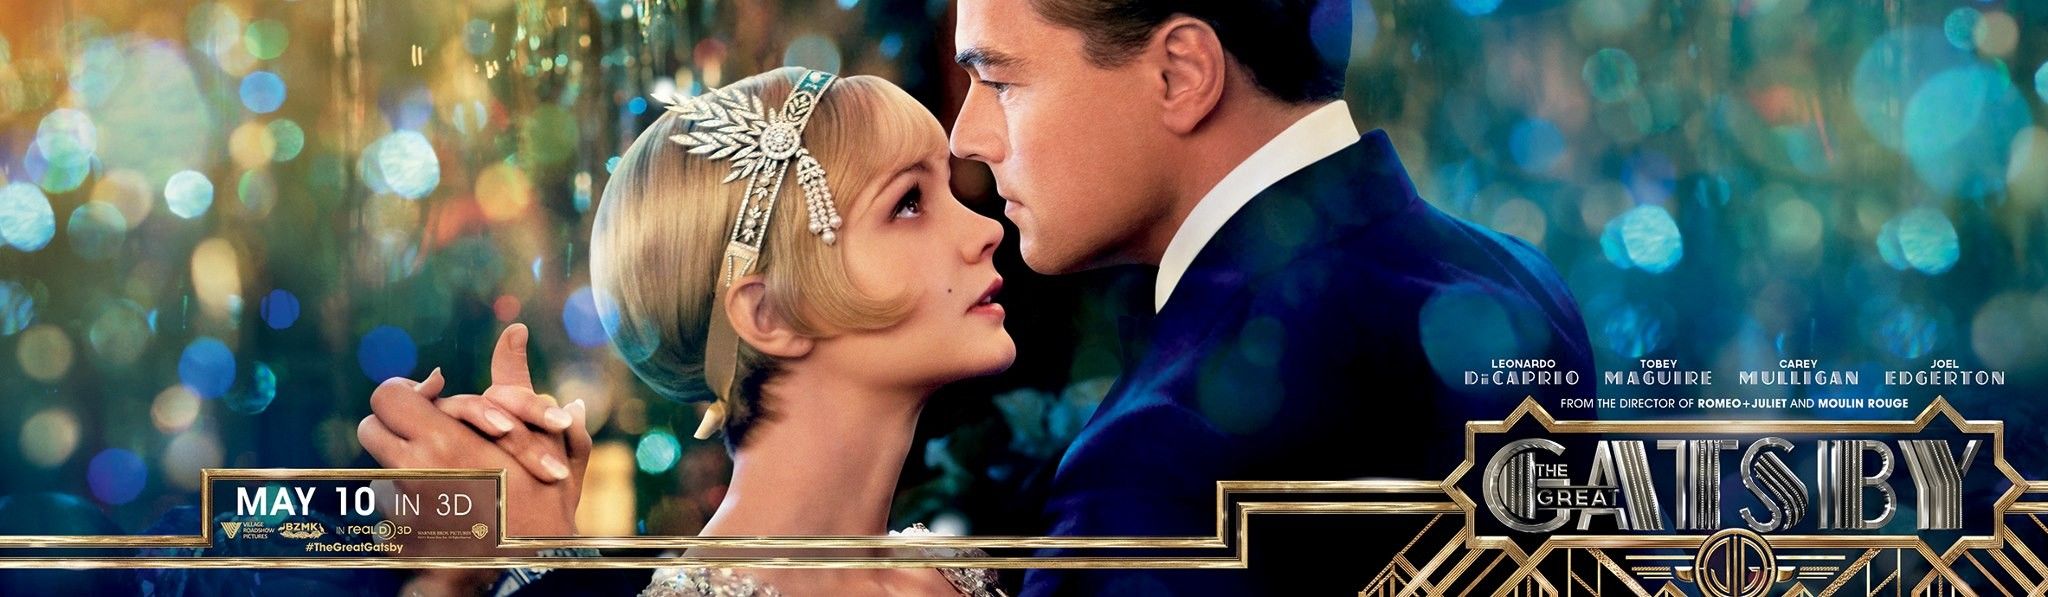 The Great Gatsby Banner 1